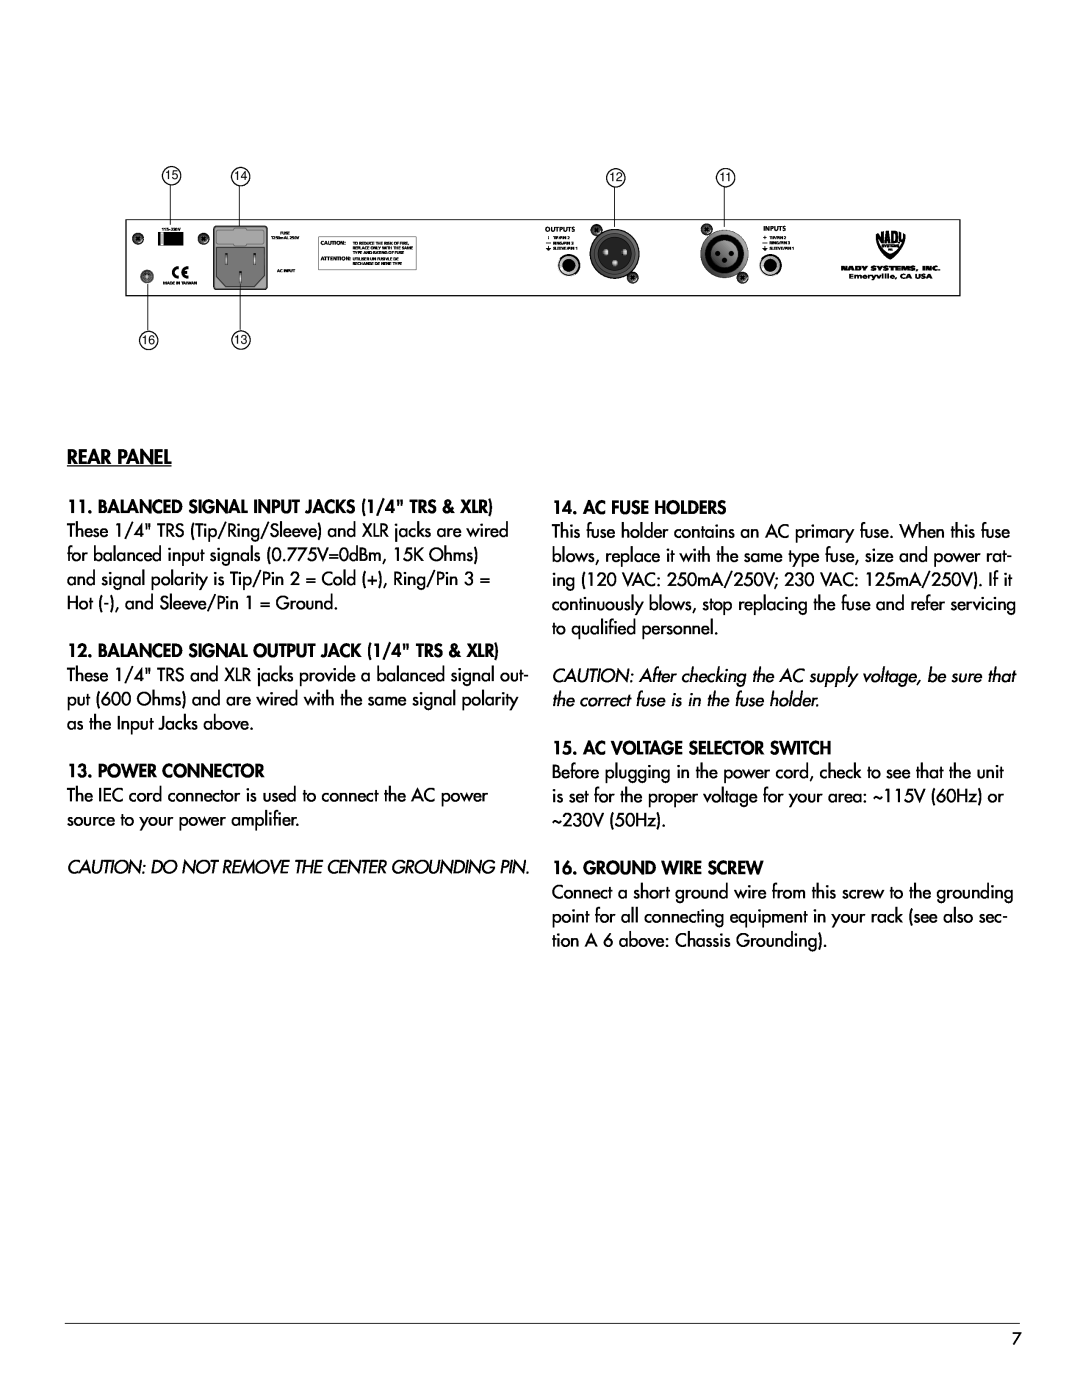 Nady Systems PEQ-5B owner manual Rear Panel 